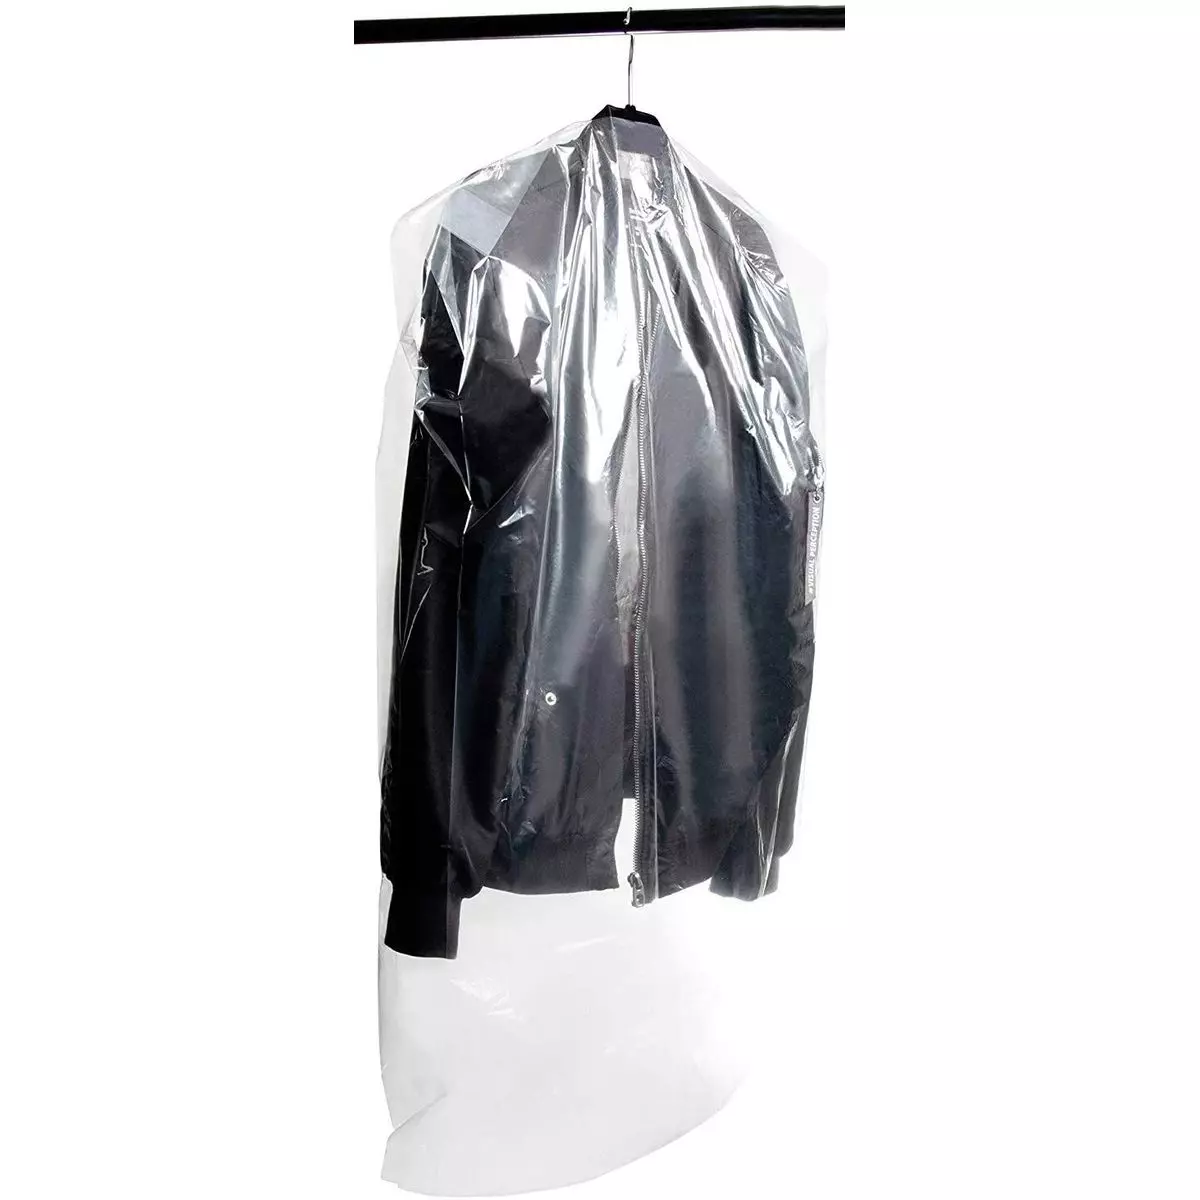 Juvale Plastic Garment Bags For Dresses And Suits